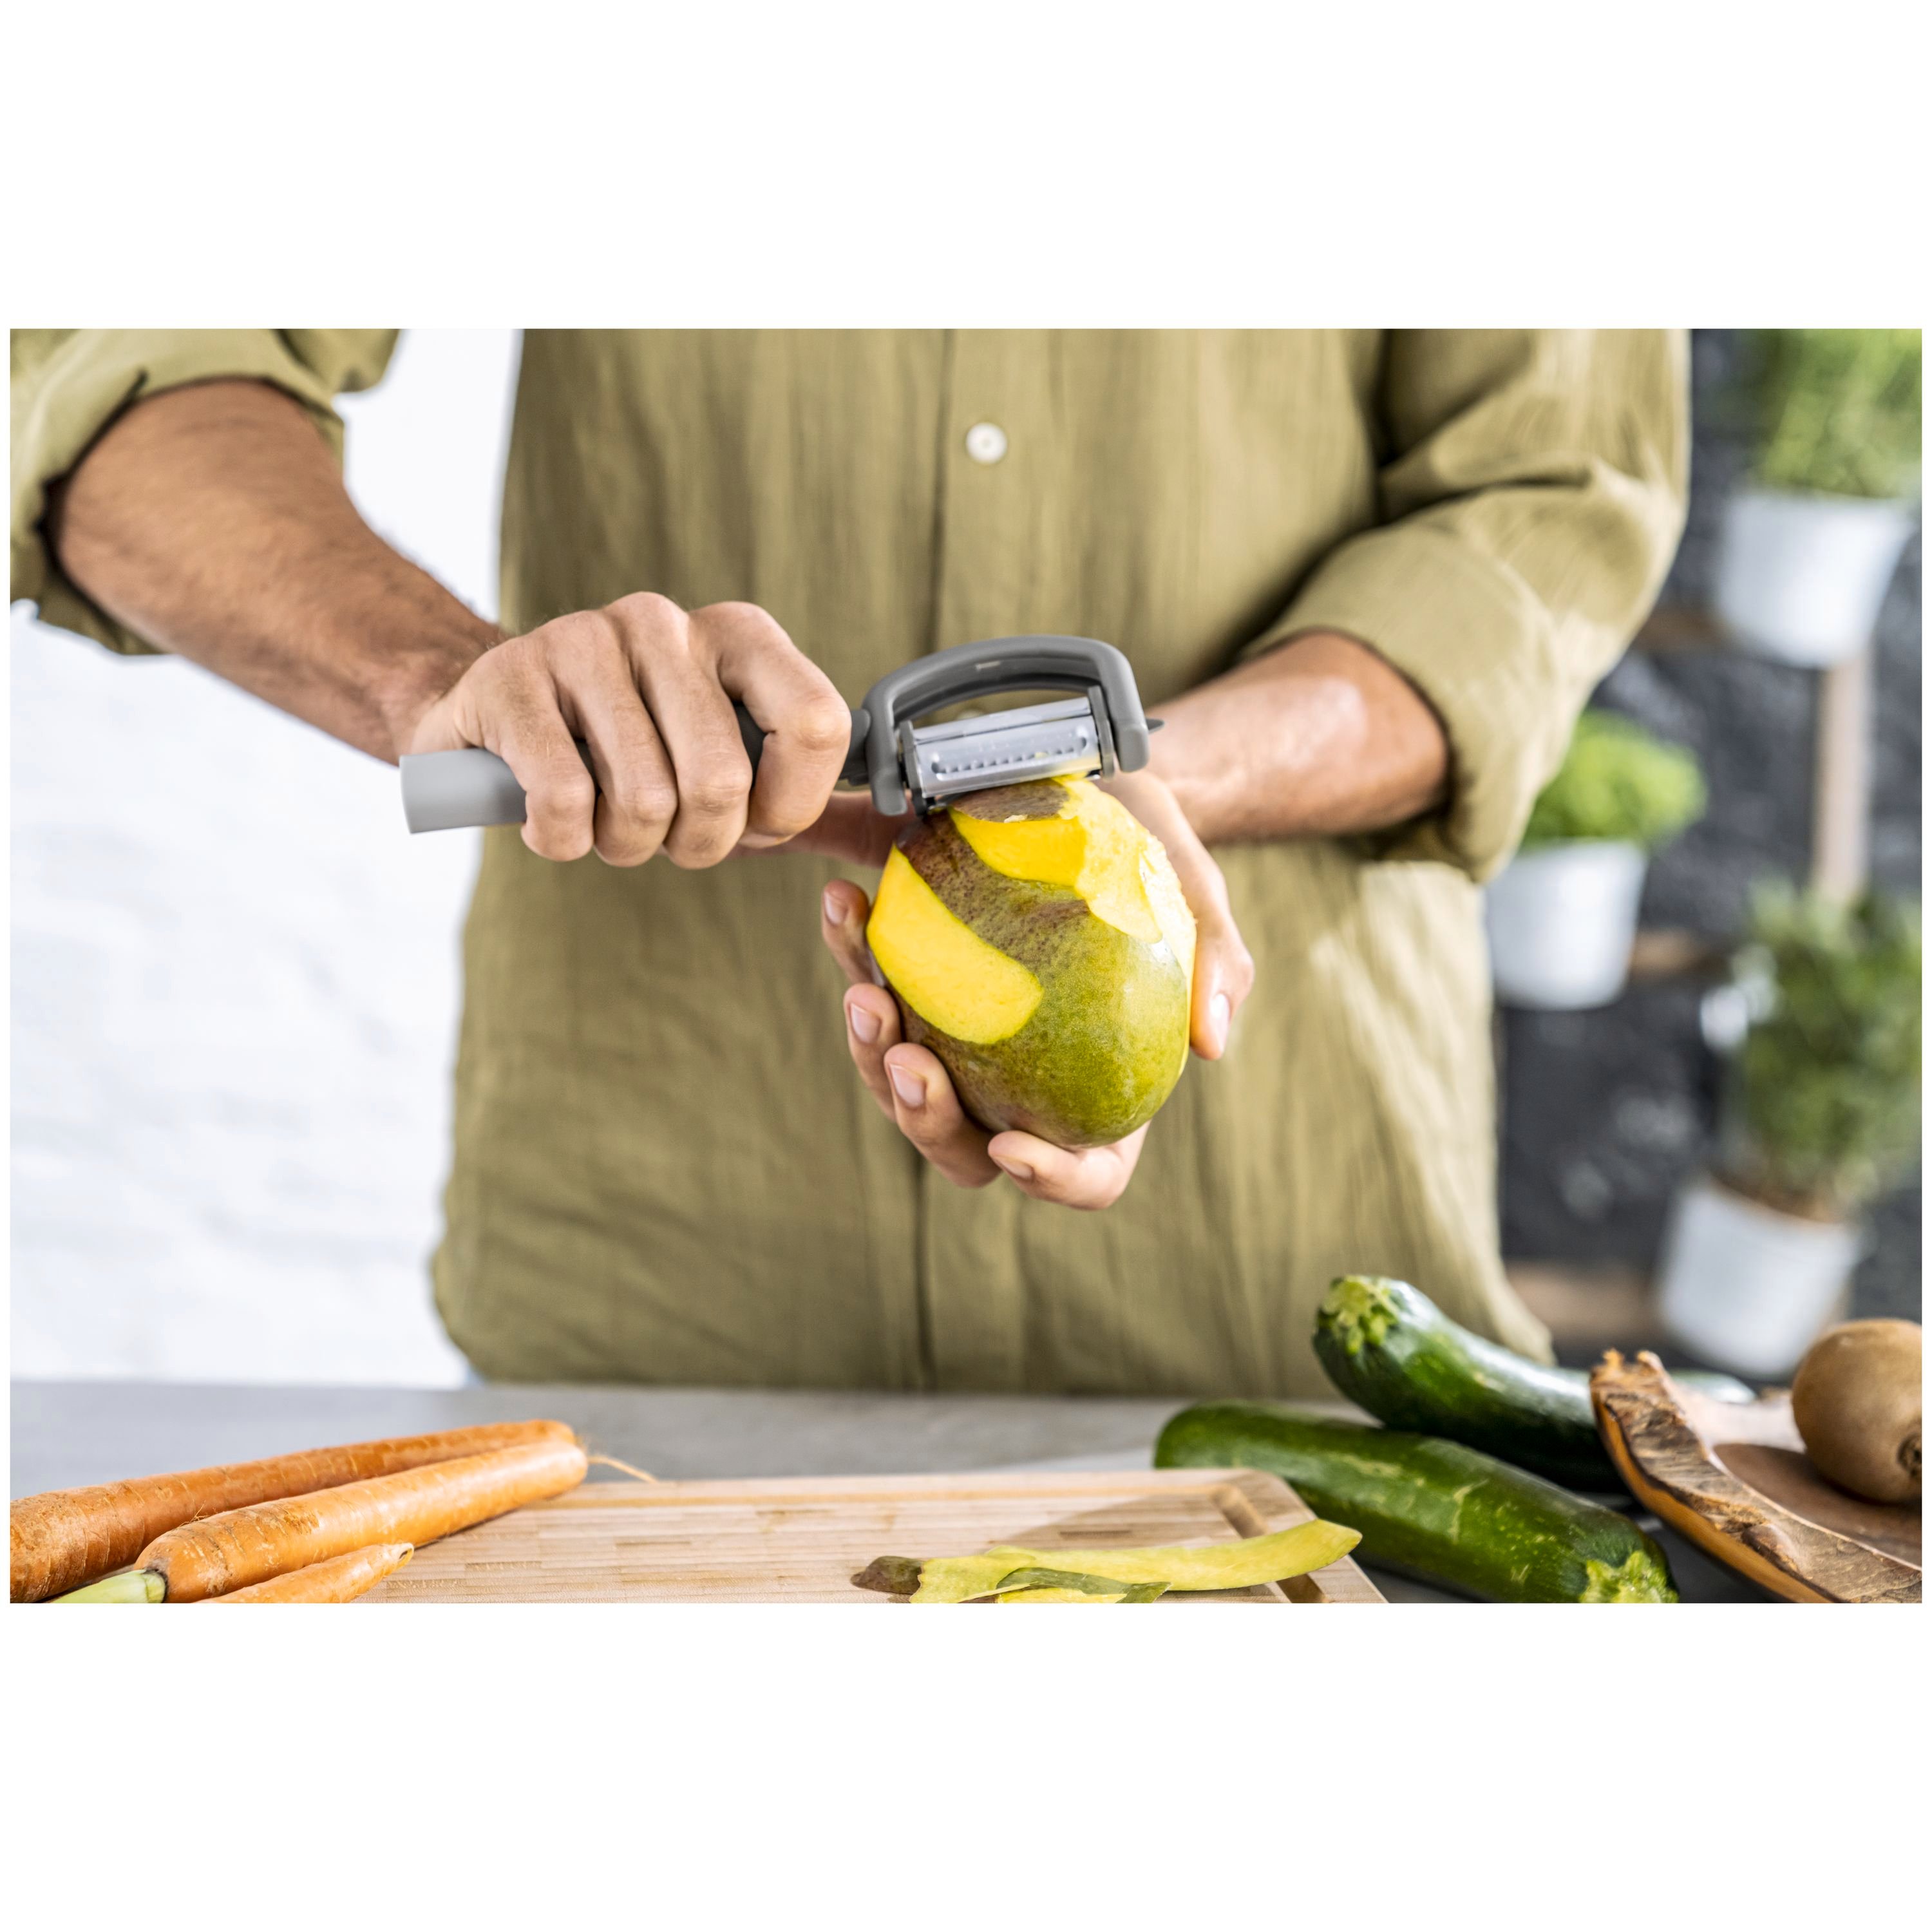 Pampered Chef Vegetable Peeler. Makes any peeling job go quick and eas